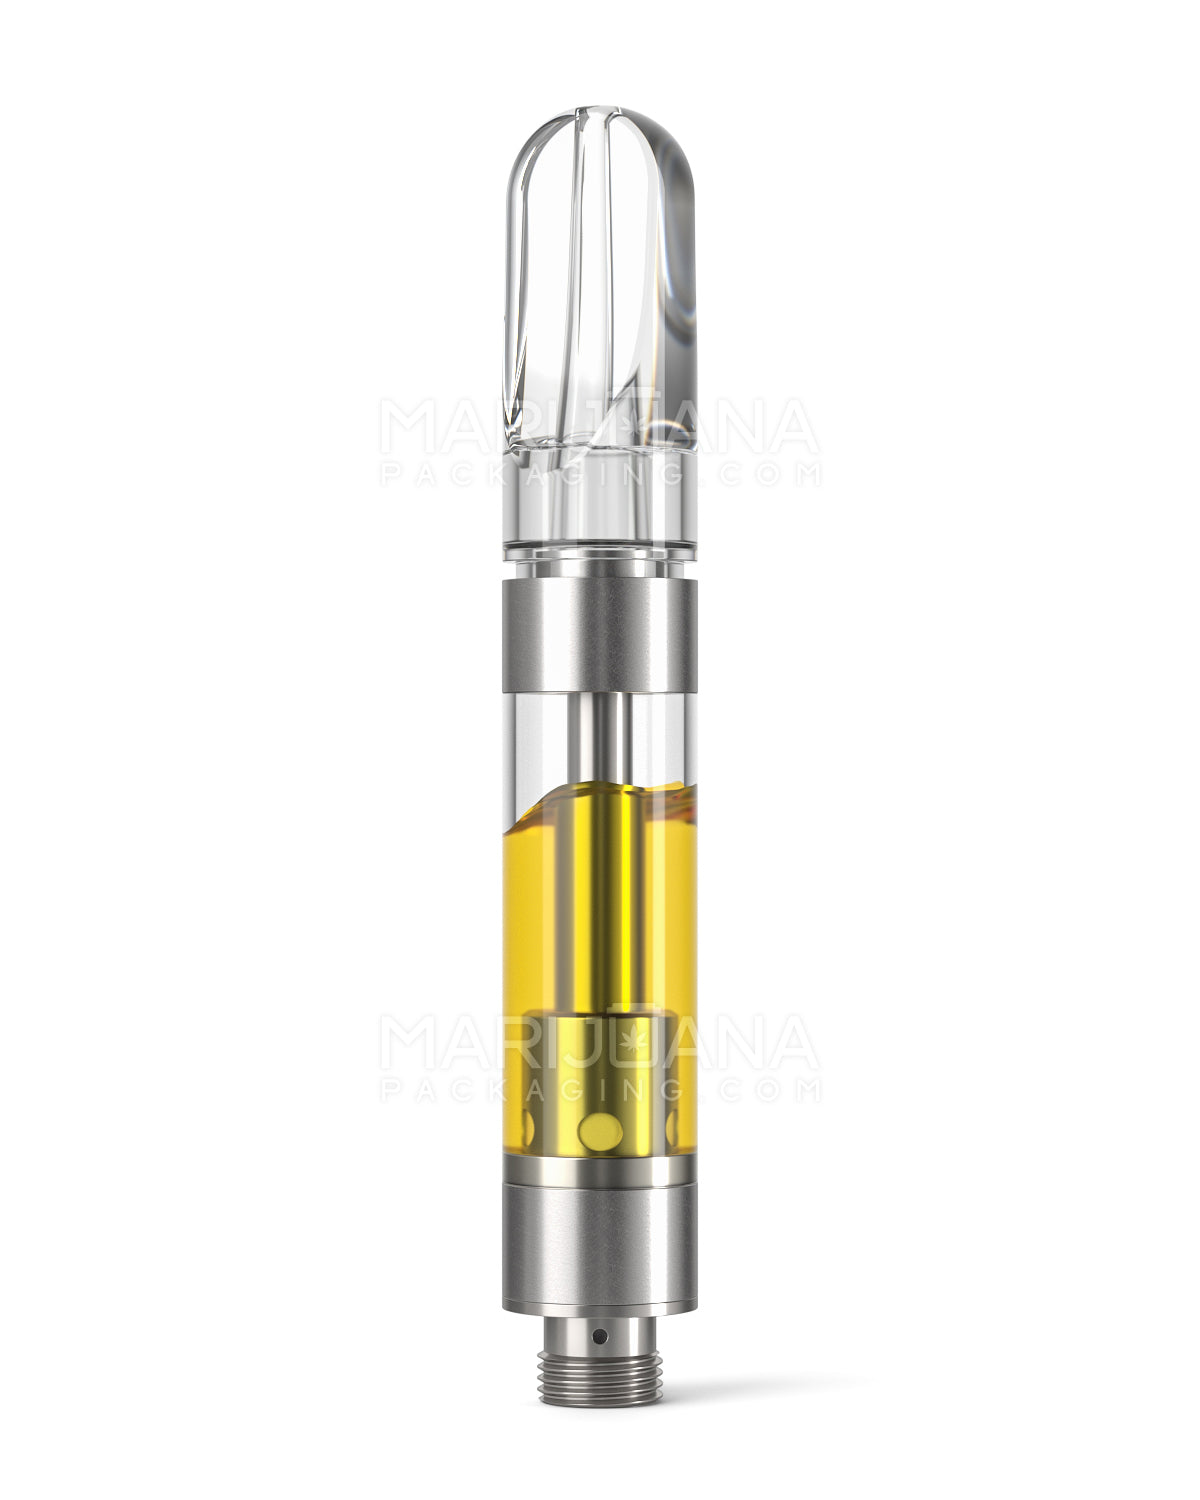 CCELL | Liquid6 Reactor Plastic Vape Cartridge with Clear Plastic Mouthpiece | 1mL - Press On - 100 Count - 2